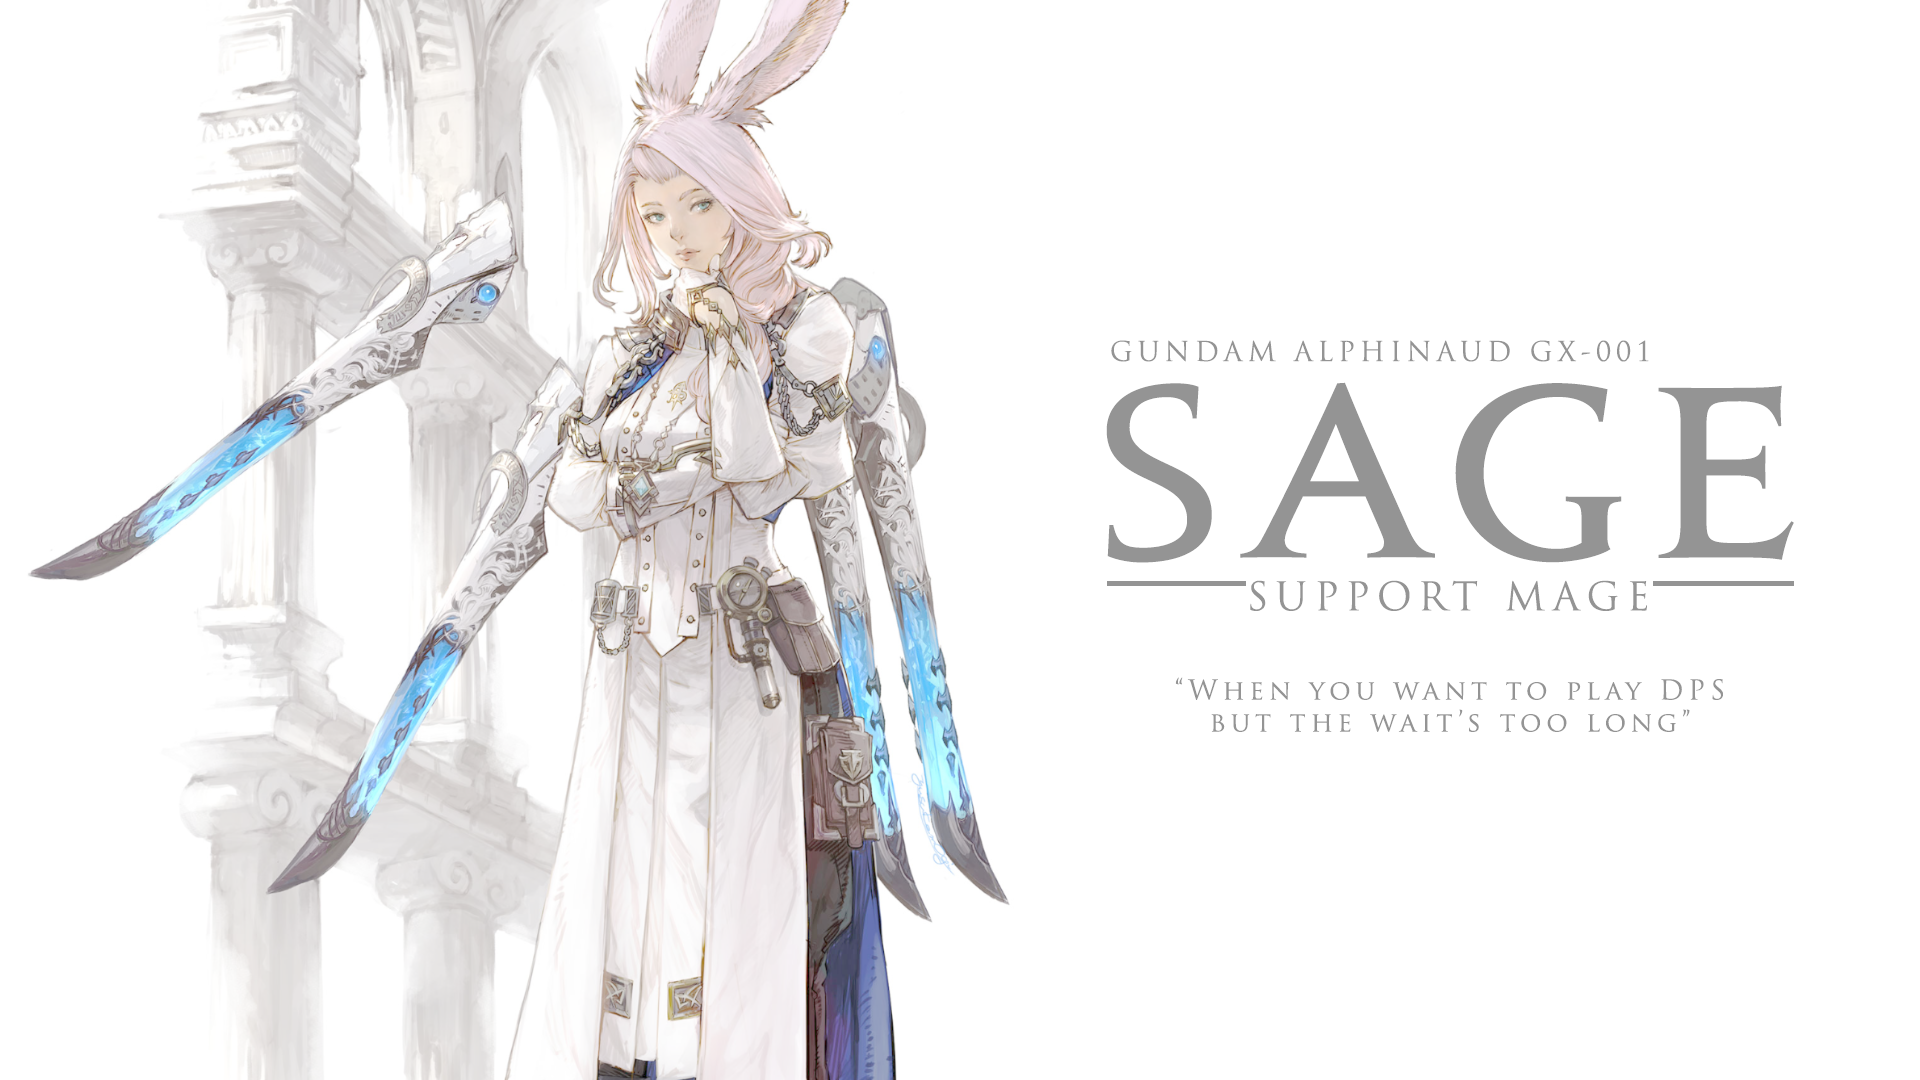 Final Fantasy XIV: This is how the new Job Sage plays